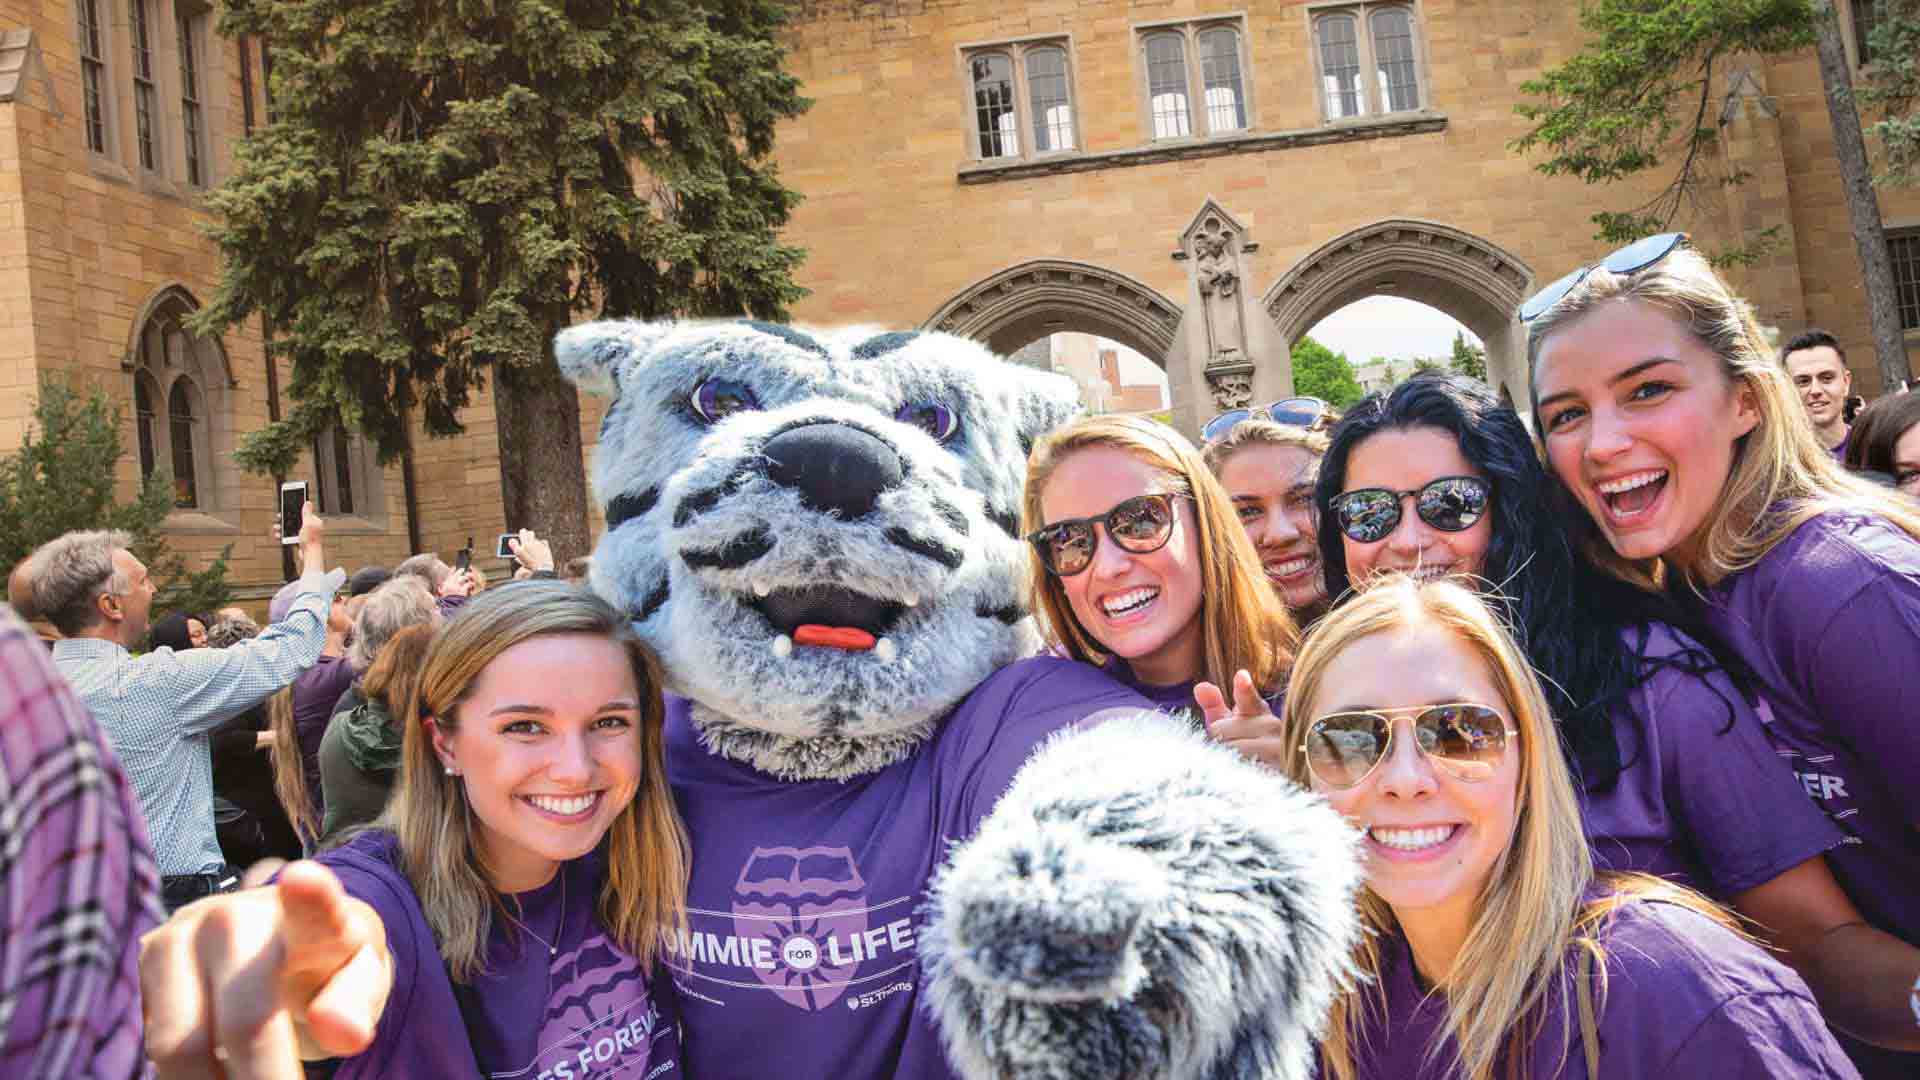 University of St. Thomas students with Tommie the mascot.